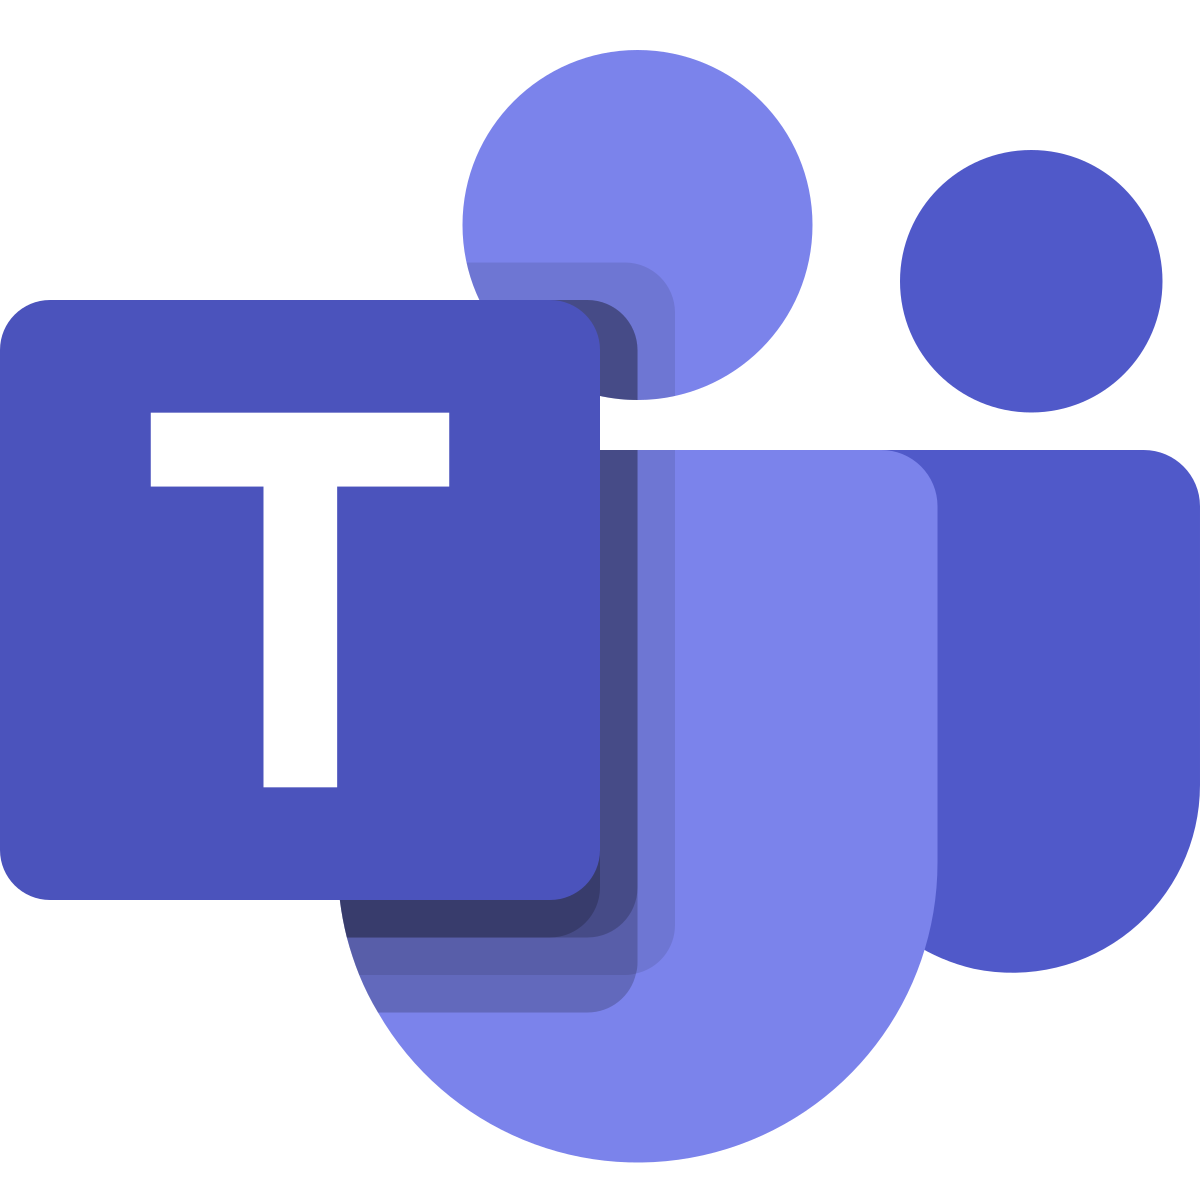 Getting started with Microsoft Teams Development - Part 2